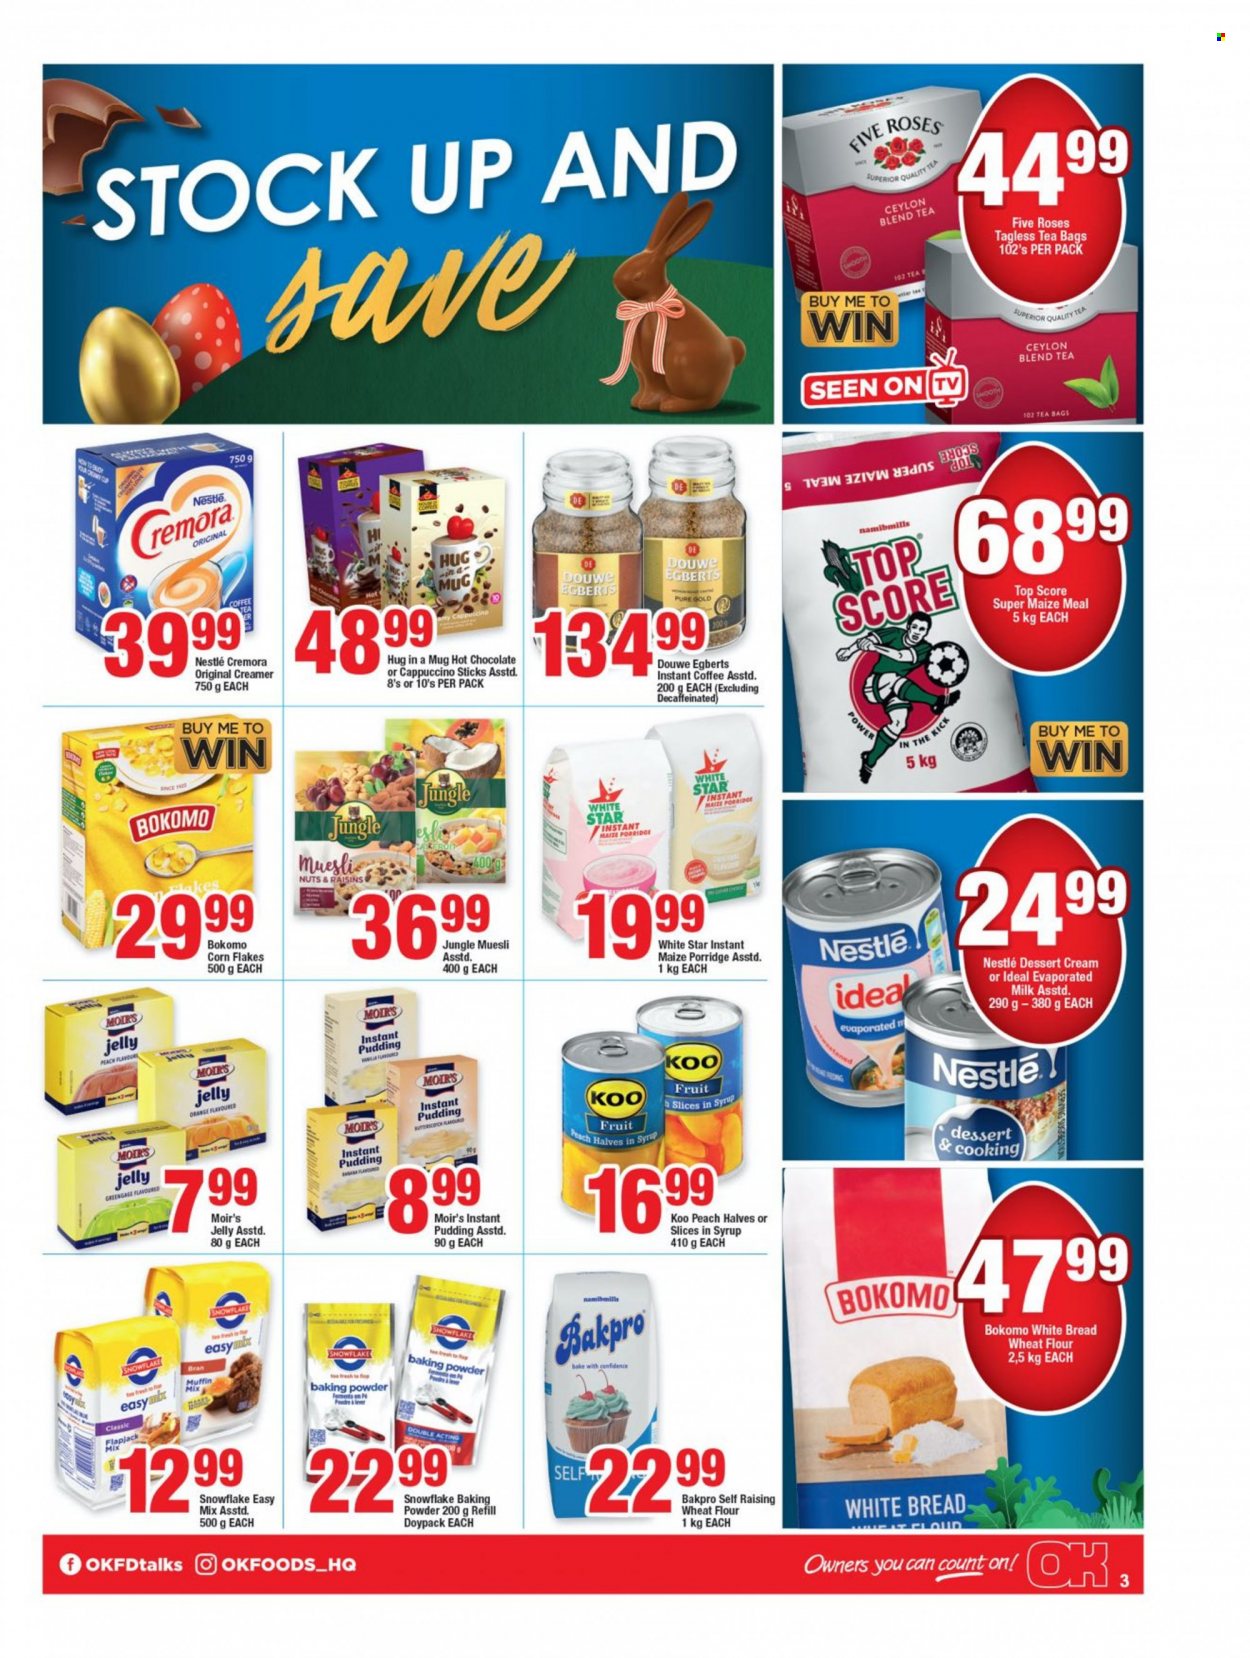 thumbnail - OK catalogue  - 22/03/2023 - 10/04/2023 - Sales products - bread, white bread, muffin mix, oranges, pudding, evaporated milk, creamer, butterscotch, Nestlé, jelly, fruit slices, baking powder, flour, wheat flour, Cremora, maize meal, White Star, Koo, corn flakes, porridge, muesli, dried fruit, hot chocolate, tea bags, cappuccino, coffee, instant coffee, Douwe Egberts. Page 3.